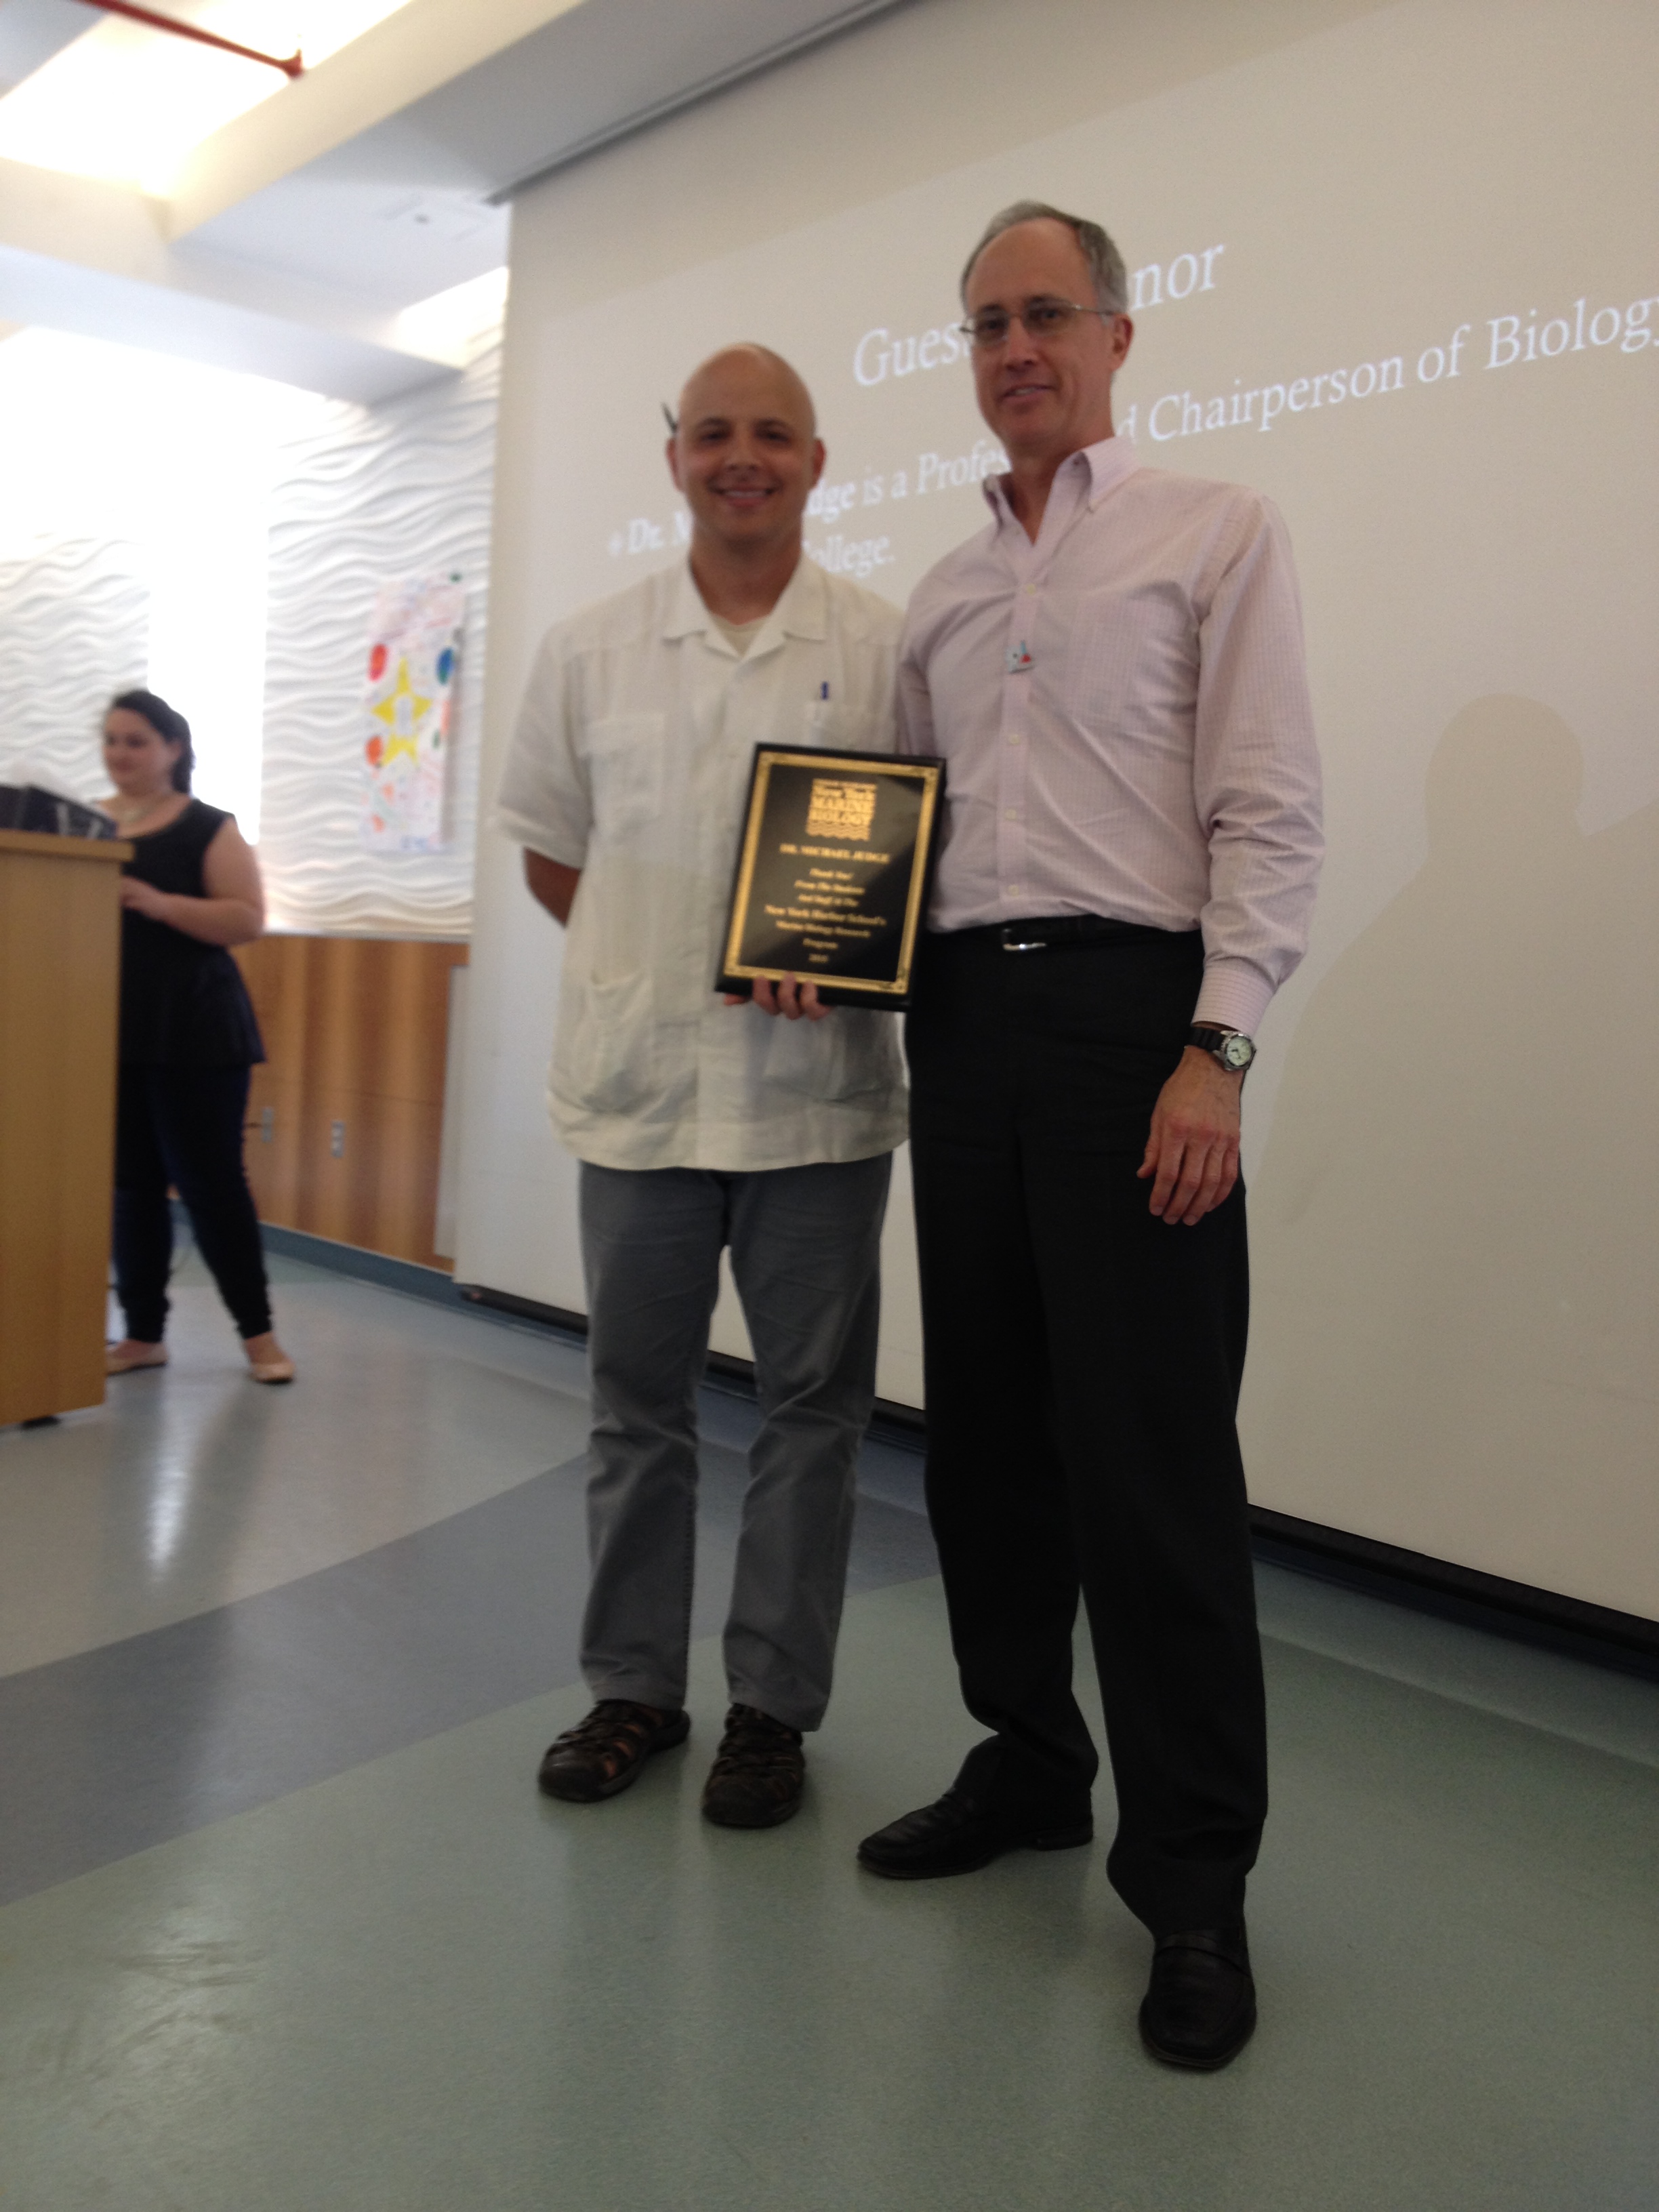 Dr. Michael Judge being presented a plaque by Mauricio Gonzalez in recognition of his longstanding collaboration with the Marine Biology Research Program 